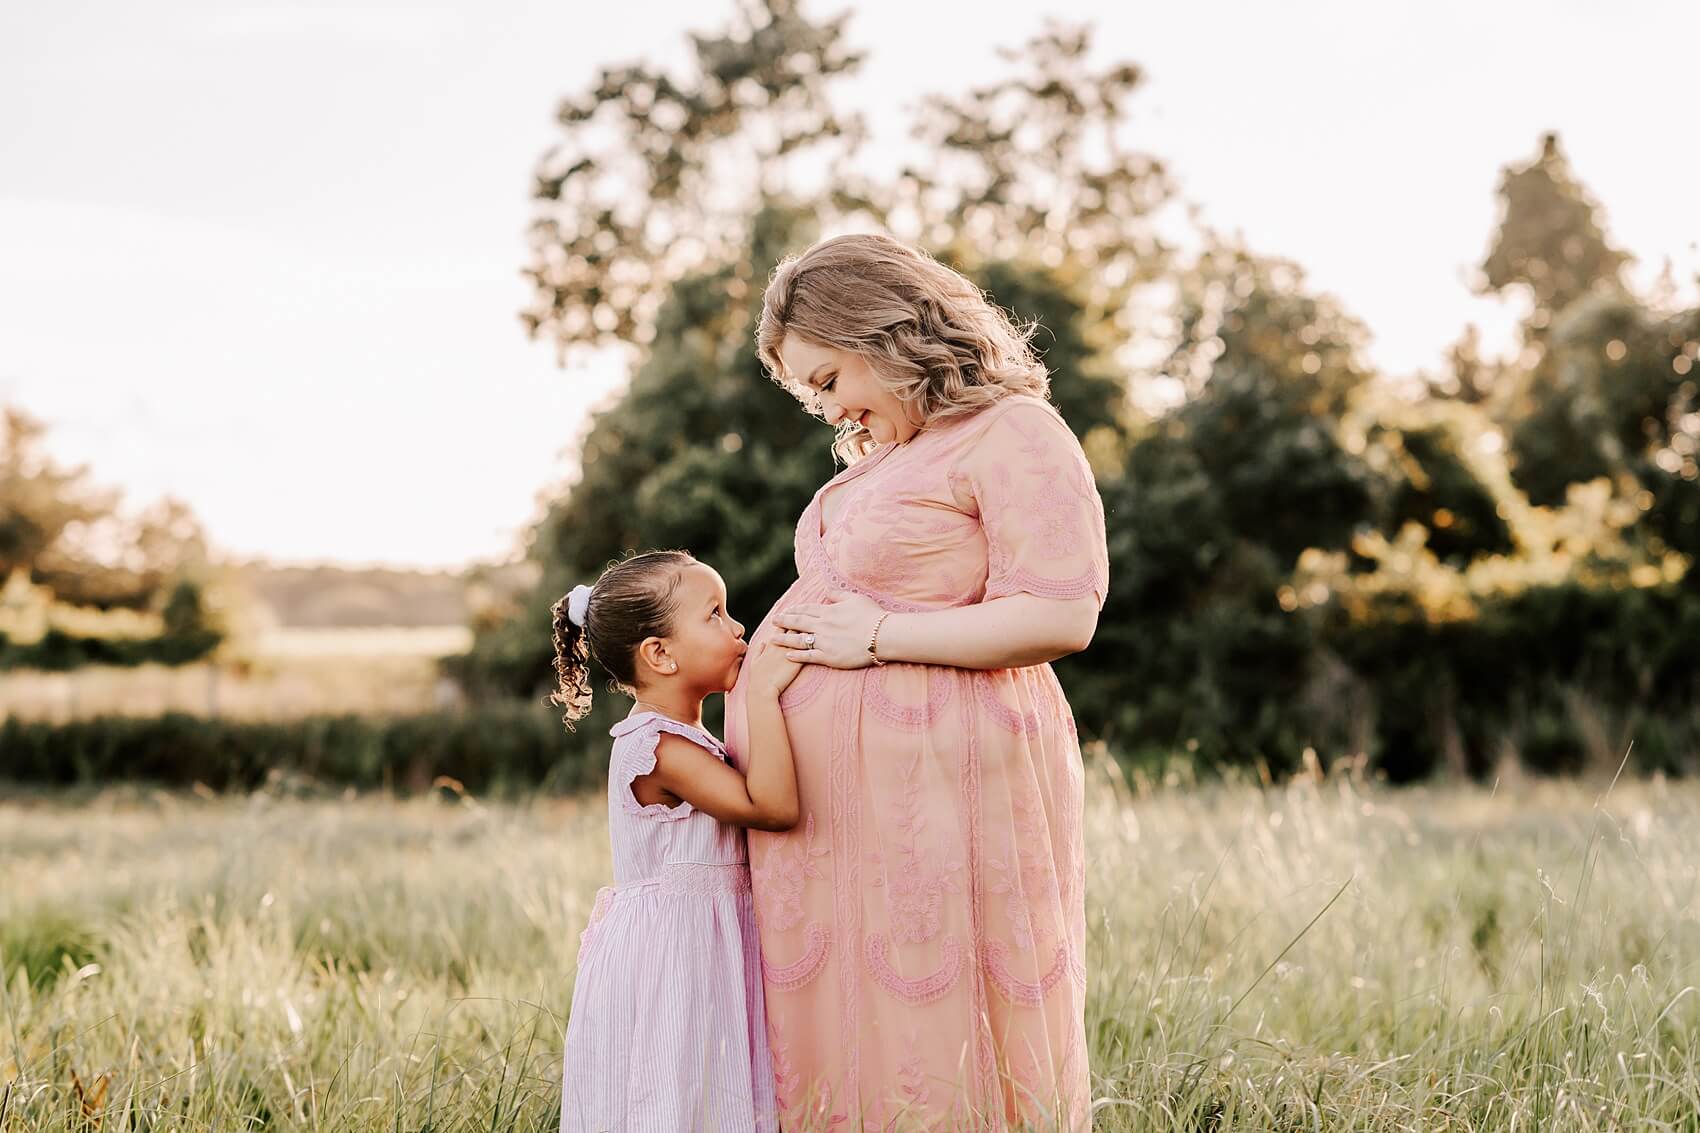 A mom to be in a pink lace maternity gown stands in a field as her daughter kisses her belly in a purple dress growing years learning center